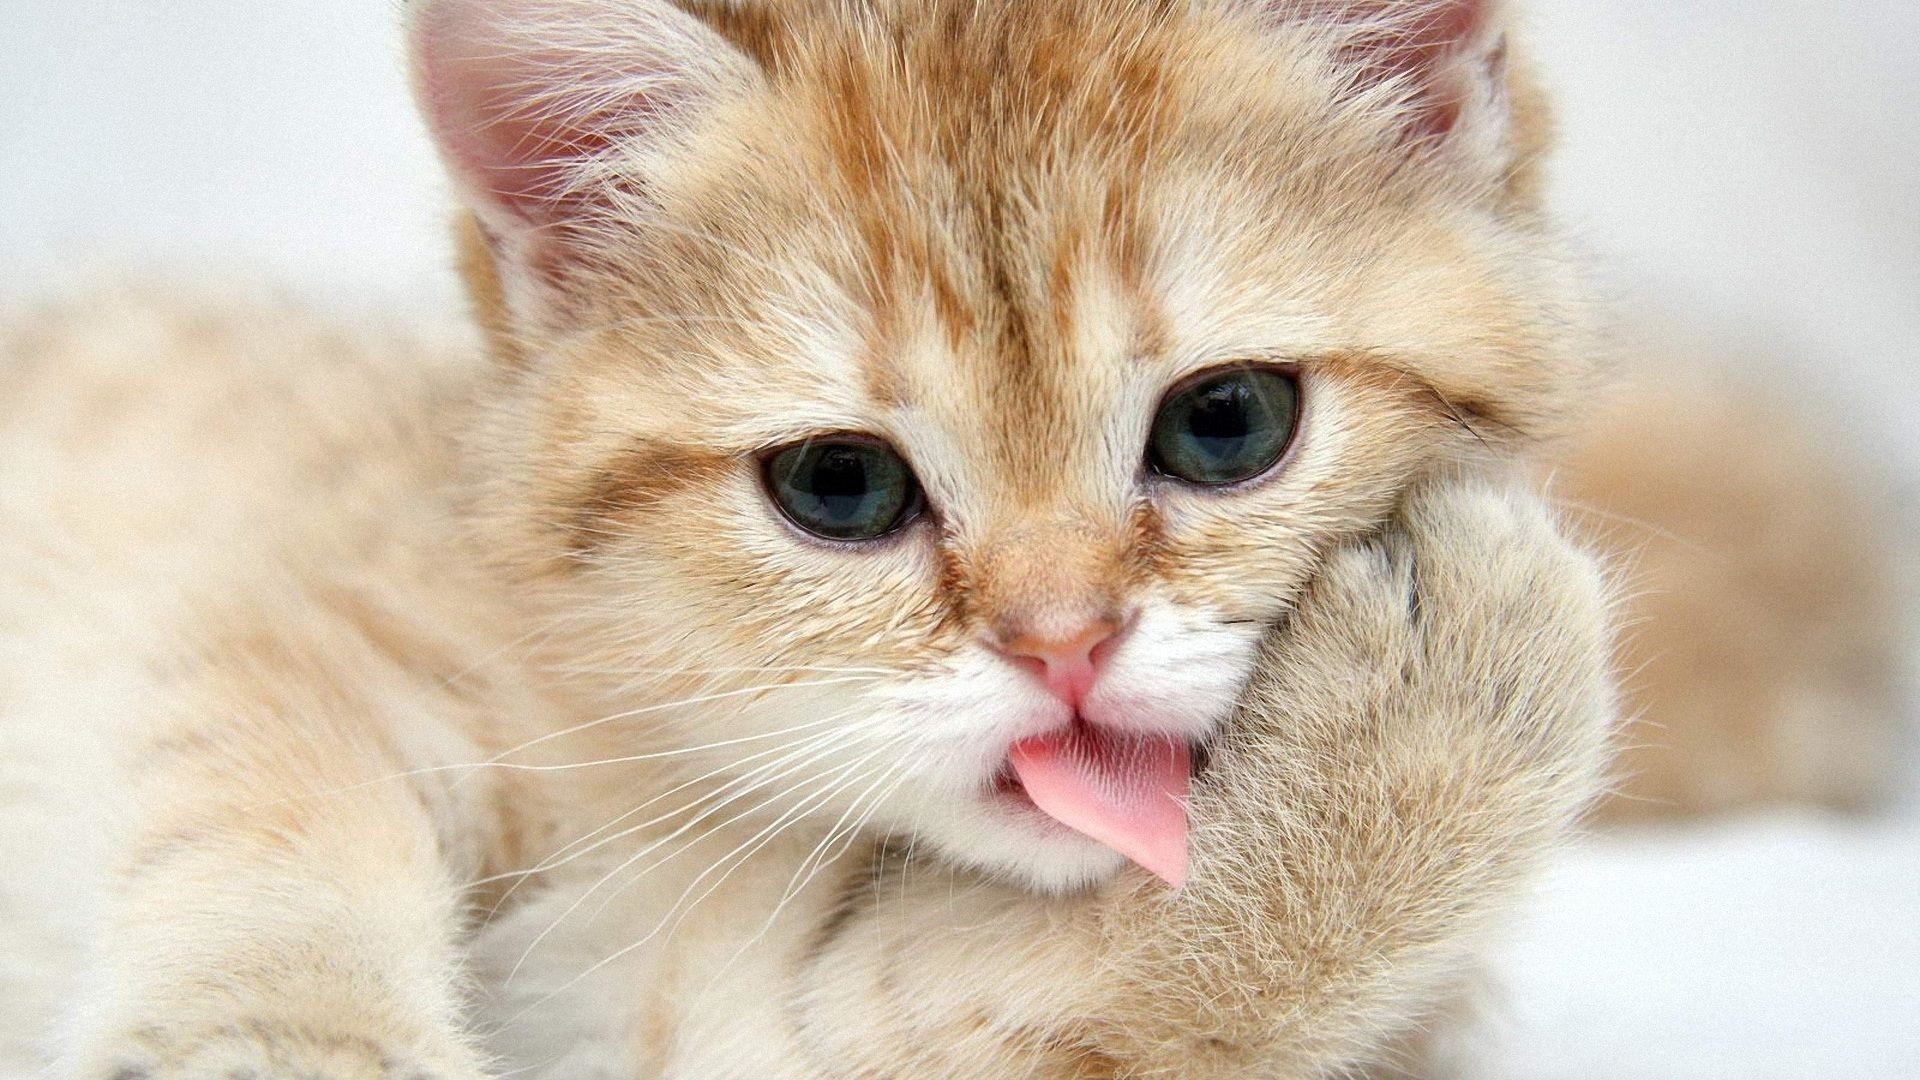 Wallpapers For Funny Cat Wallpapers For Desktop